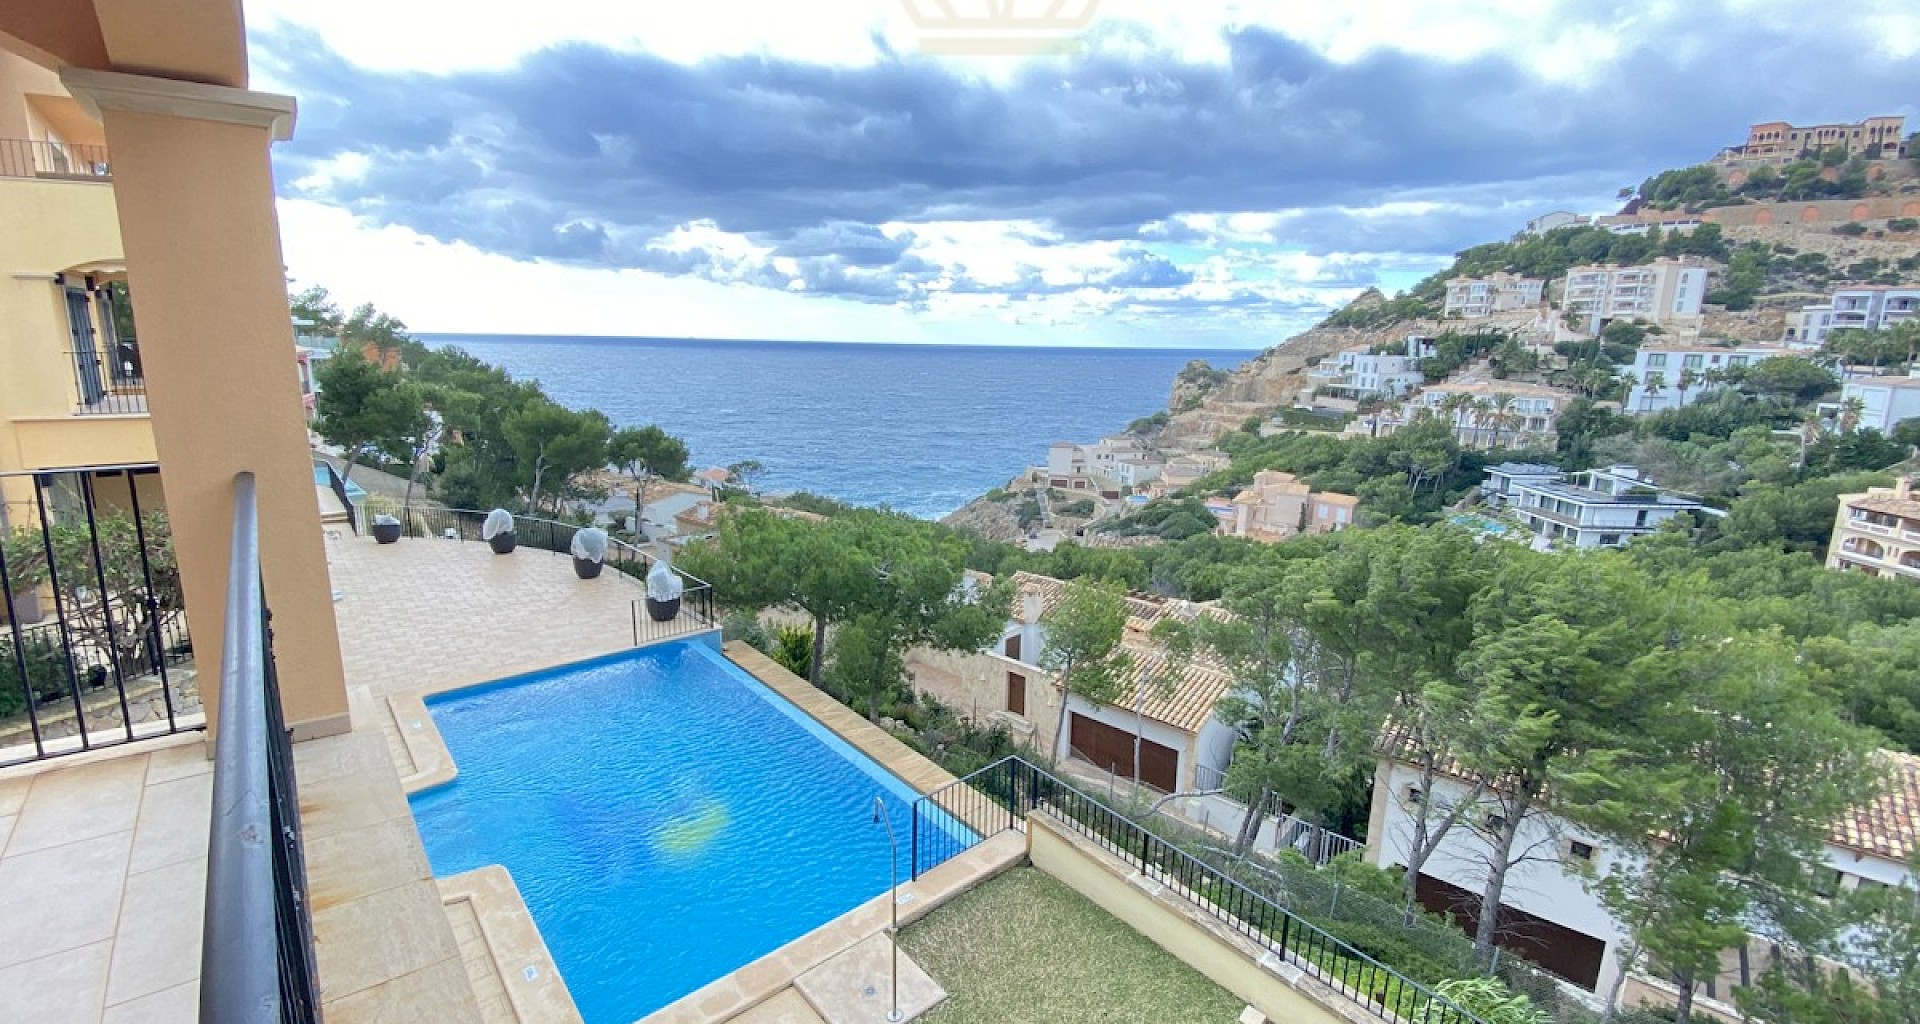 KROHN & LUEDEMANN Modern Apartment in Port Andratx with seaview near to the pool Cala Morgues Meerblick Apartment 01